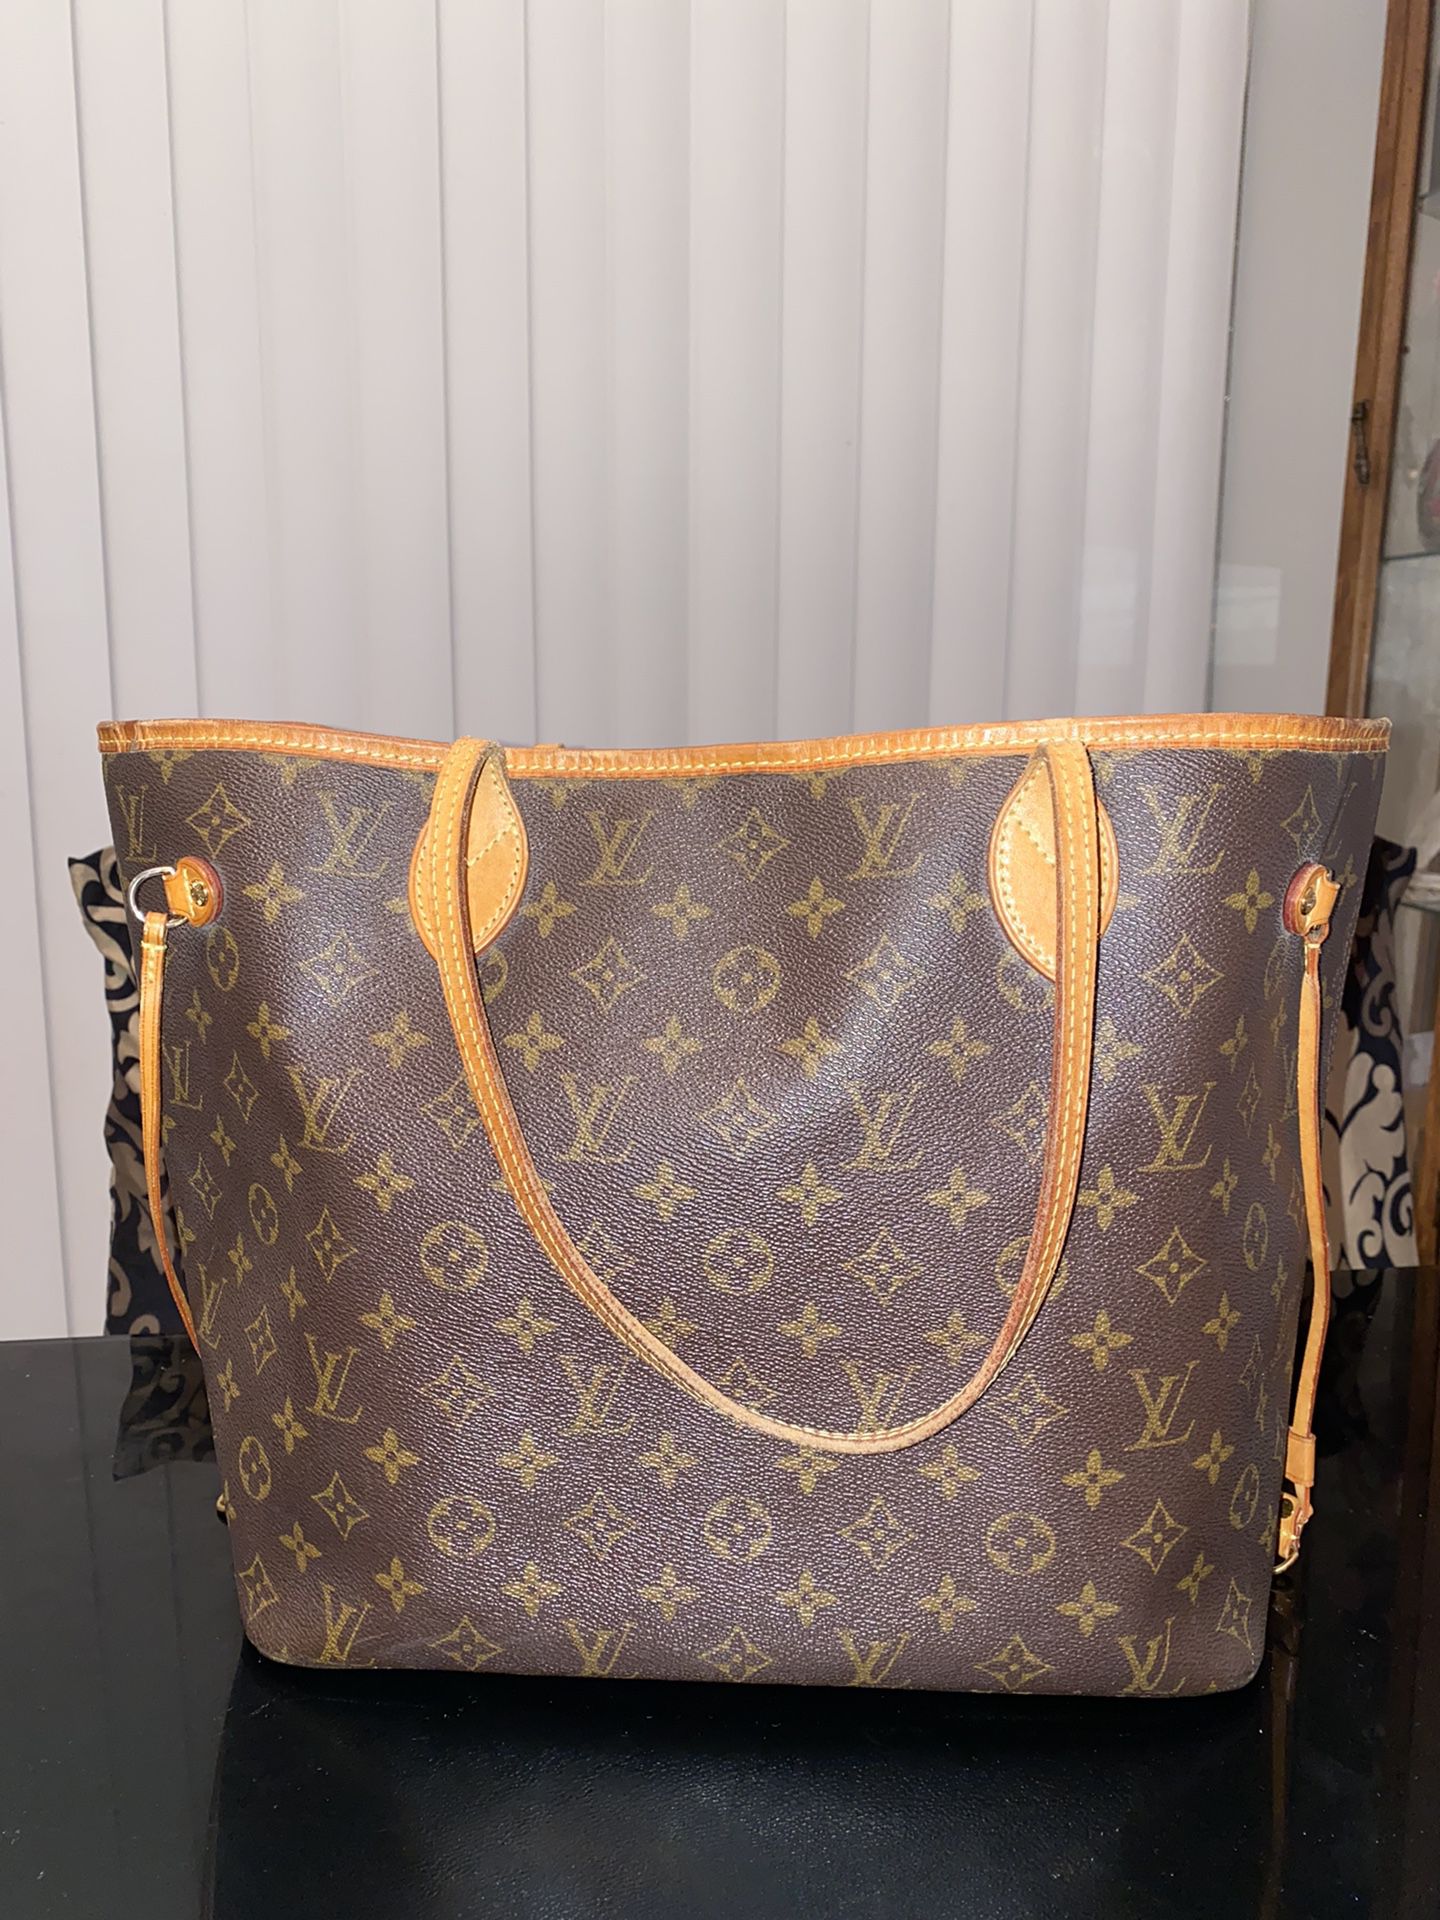 Authentic Louis Vuitton Neverfull for Sale in Bellevue, WA - OfferUp